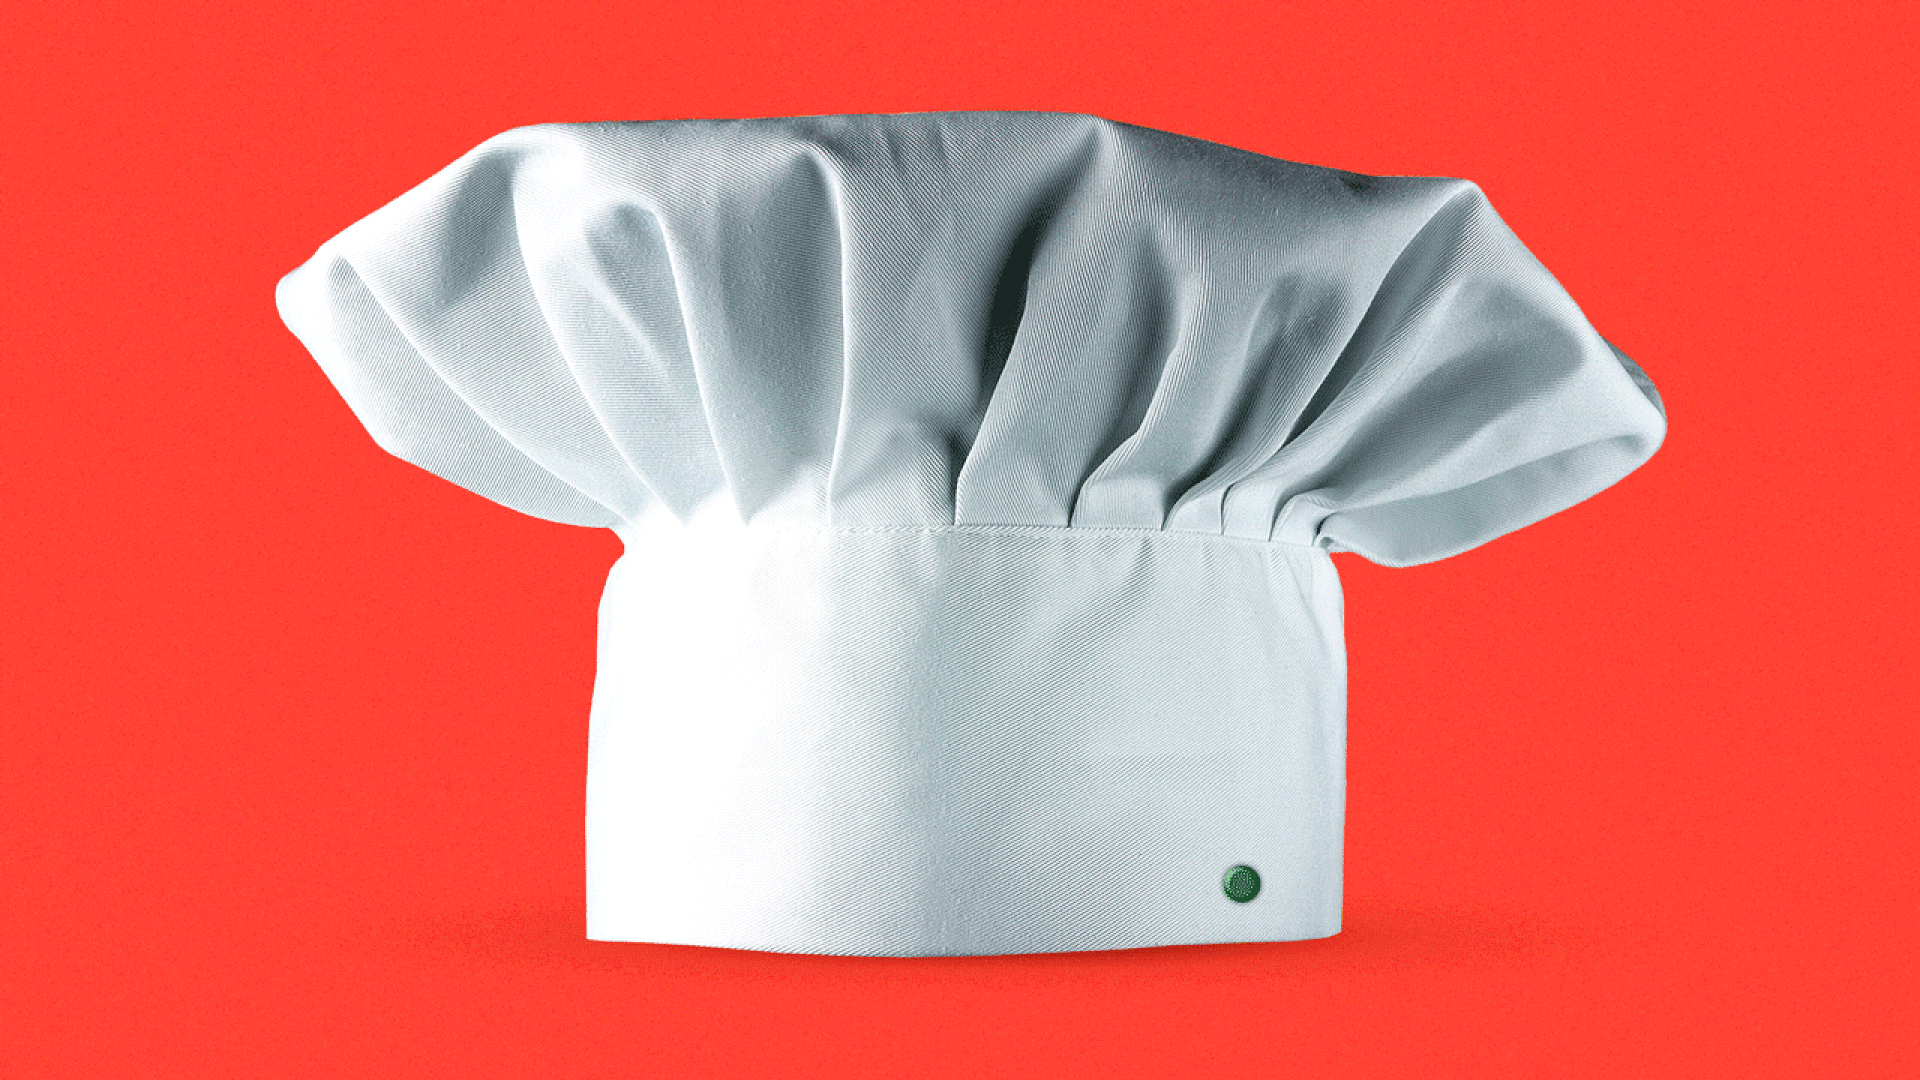 A chef's hat with a green "on" button